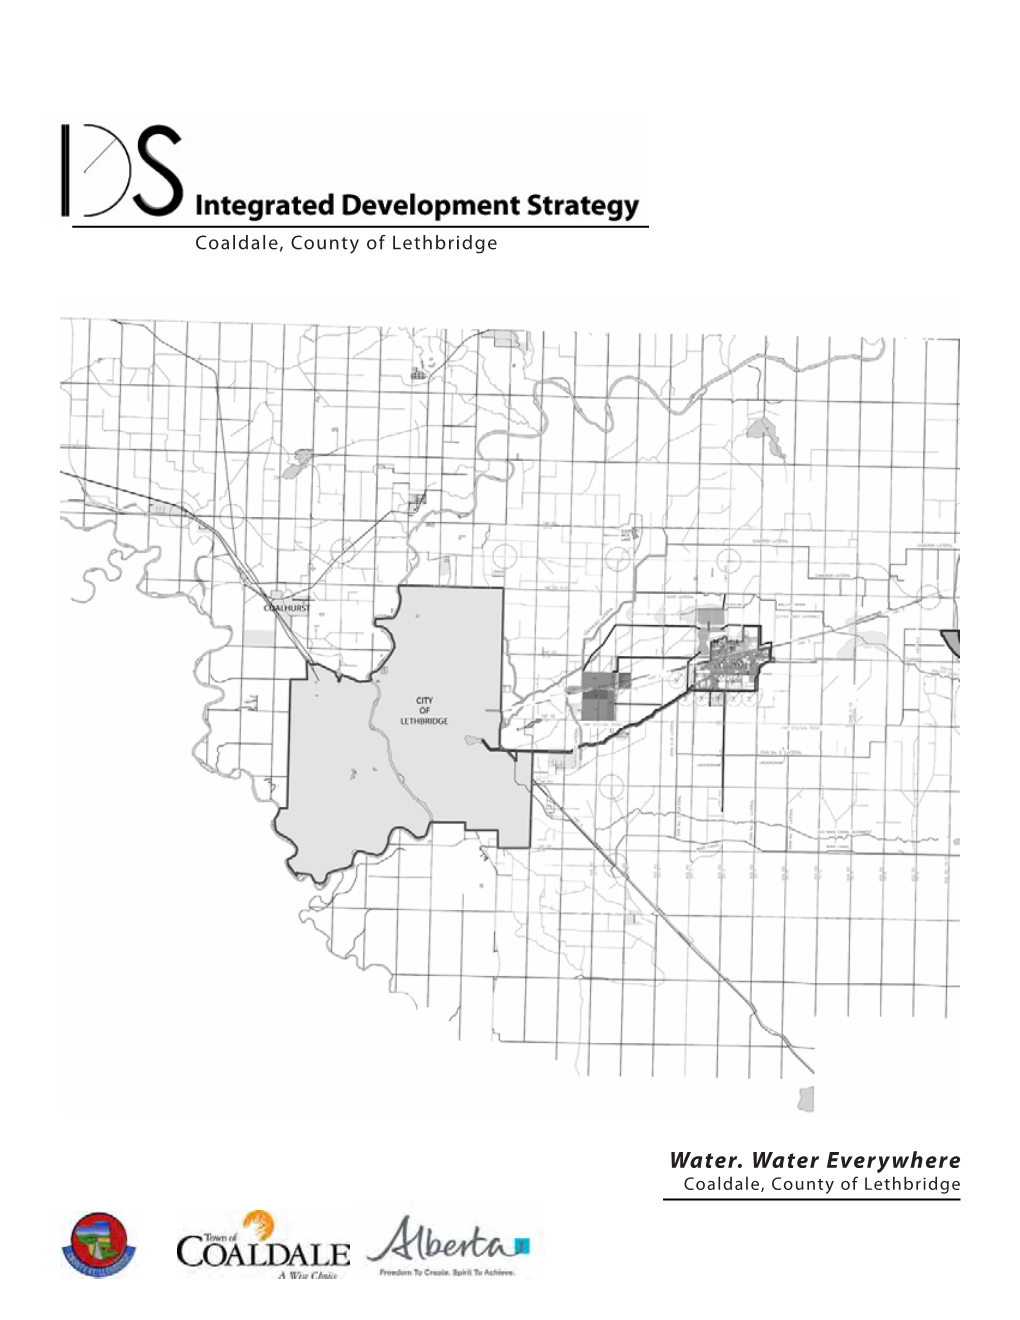 Integrated Development Strategy Between the County of Lethbridge and the Town of Coaldale